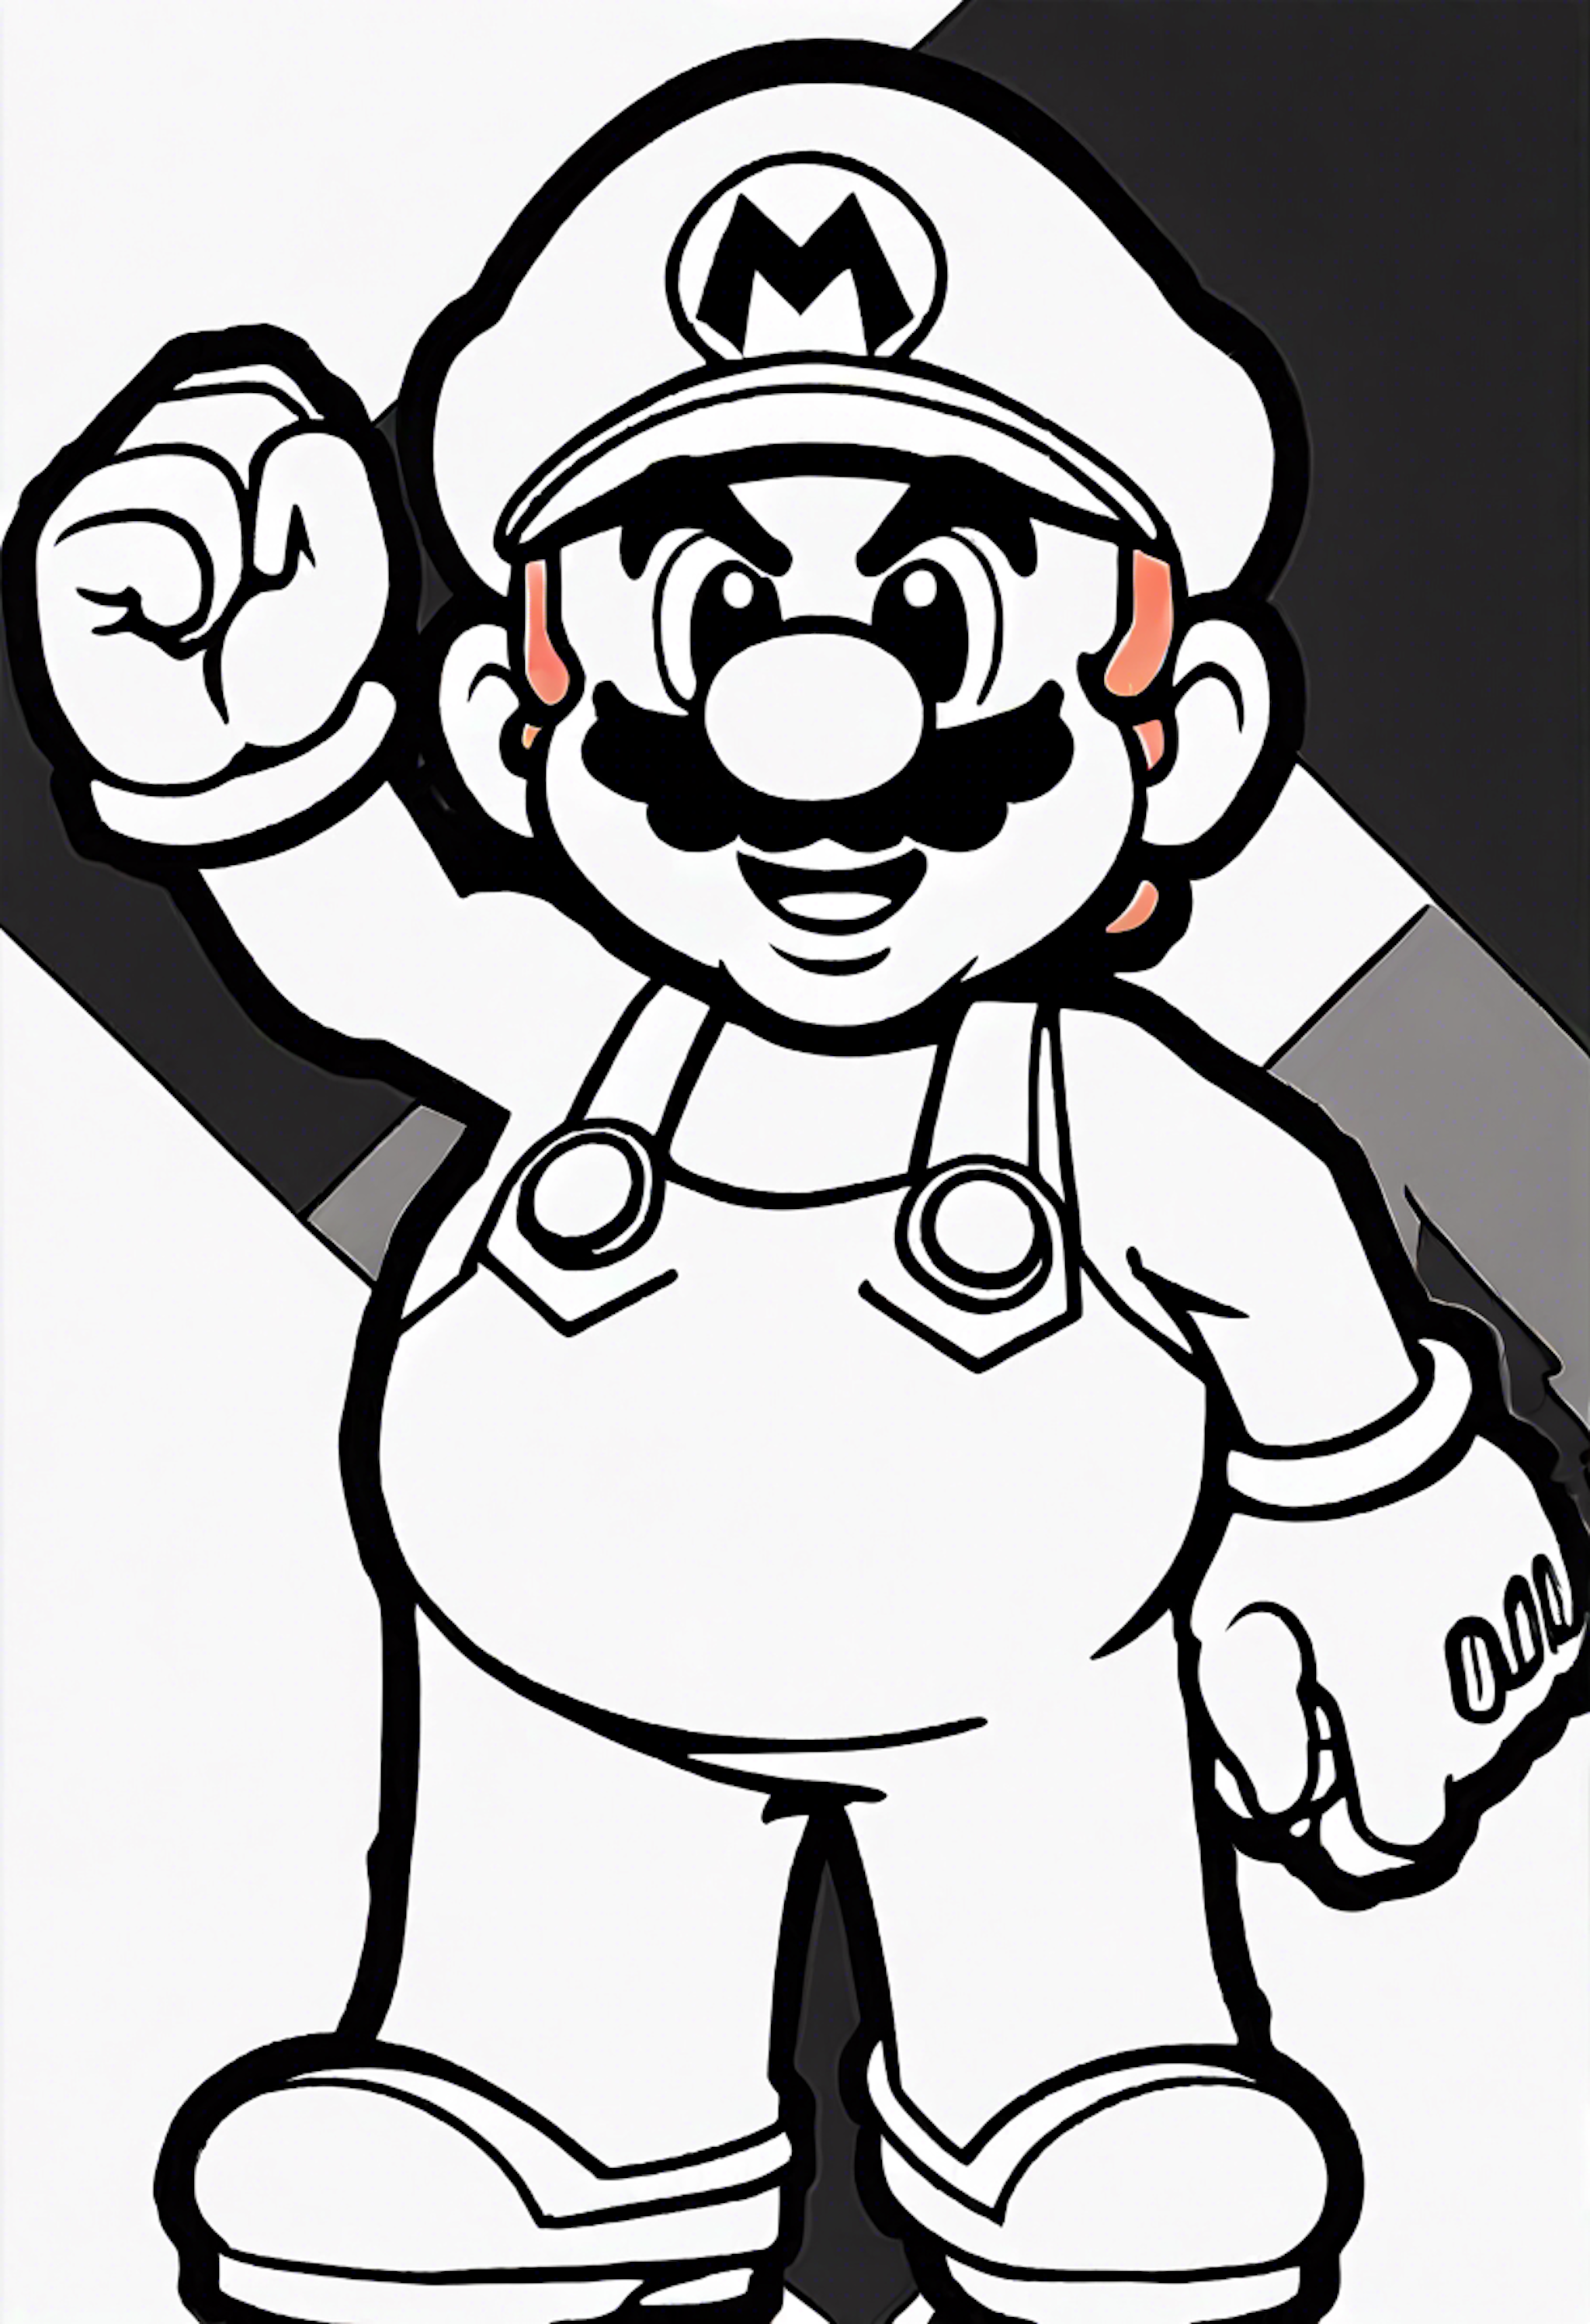 A coloring page for 1 Mario And Luigi coloring pages